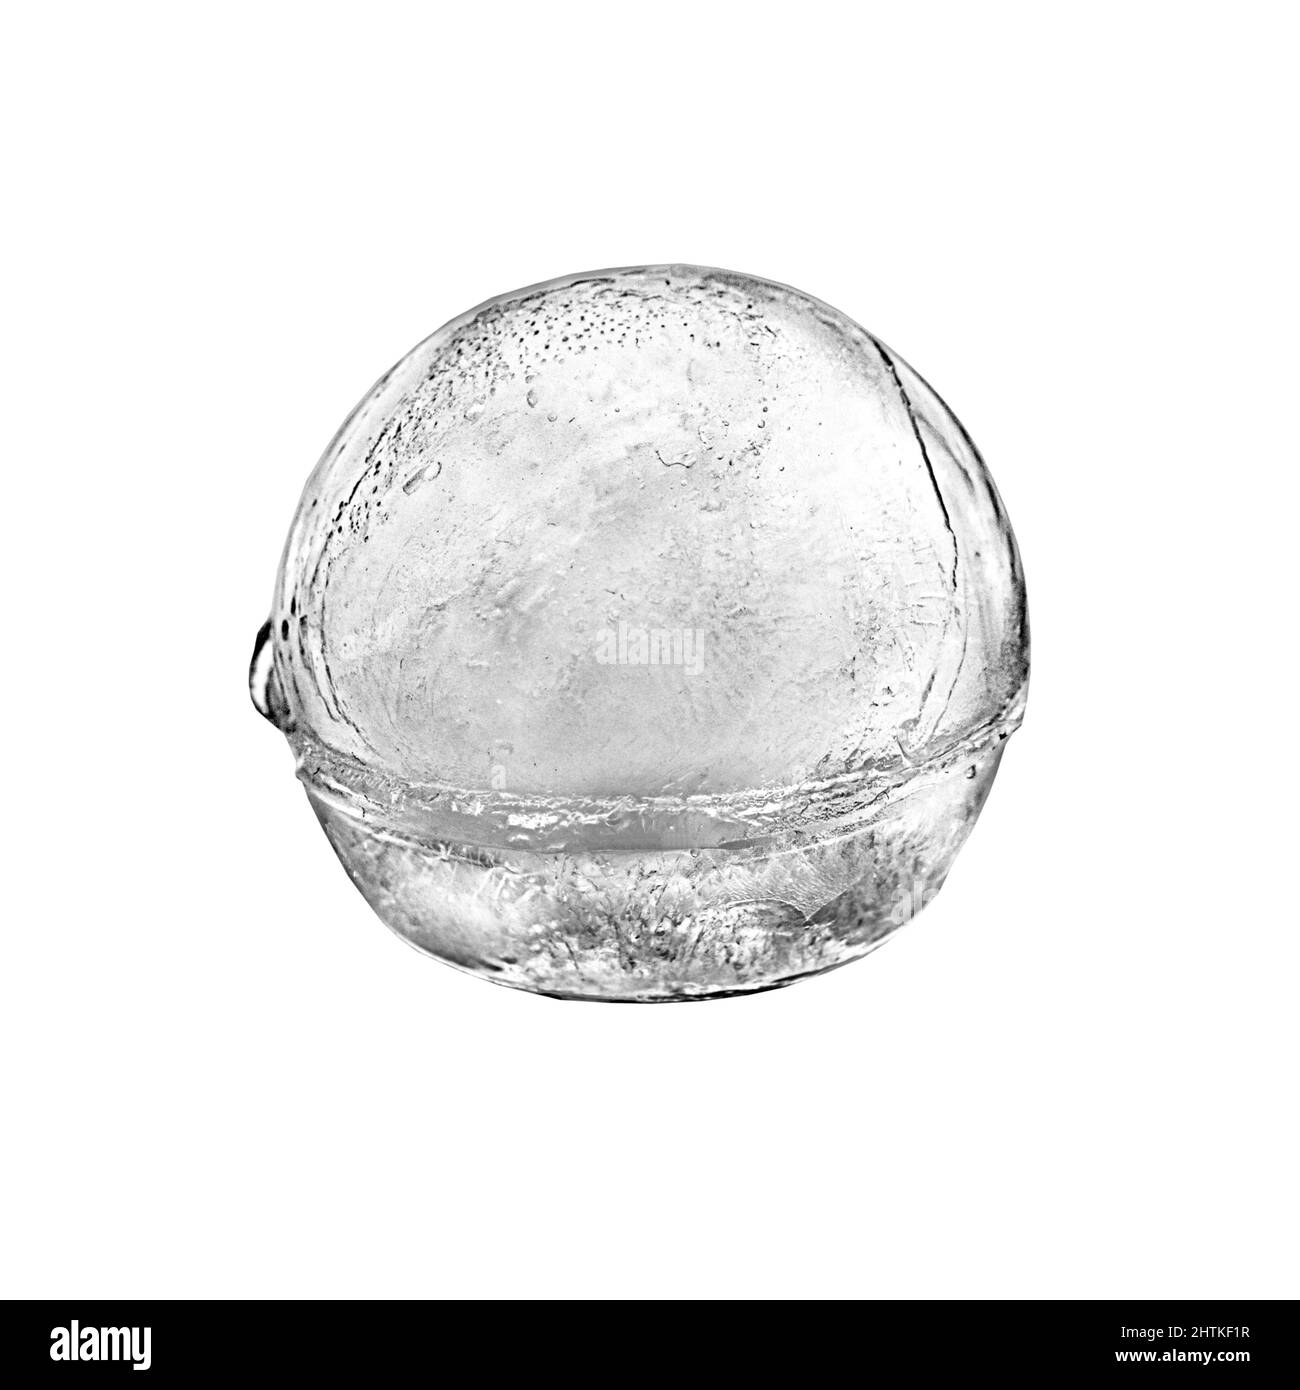 https://c8.alamy.com/comp/2HTKF1R/clear-round-ice-ball-on-a-white-background-2HTKF1R.jpg